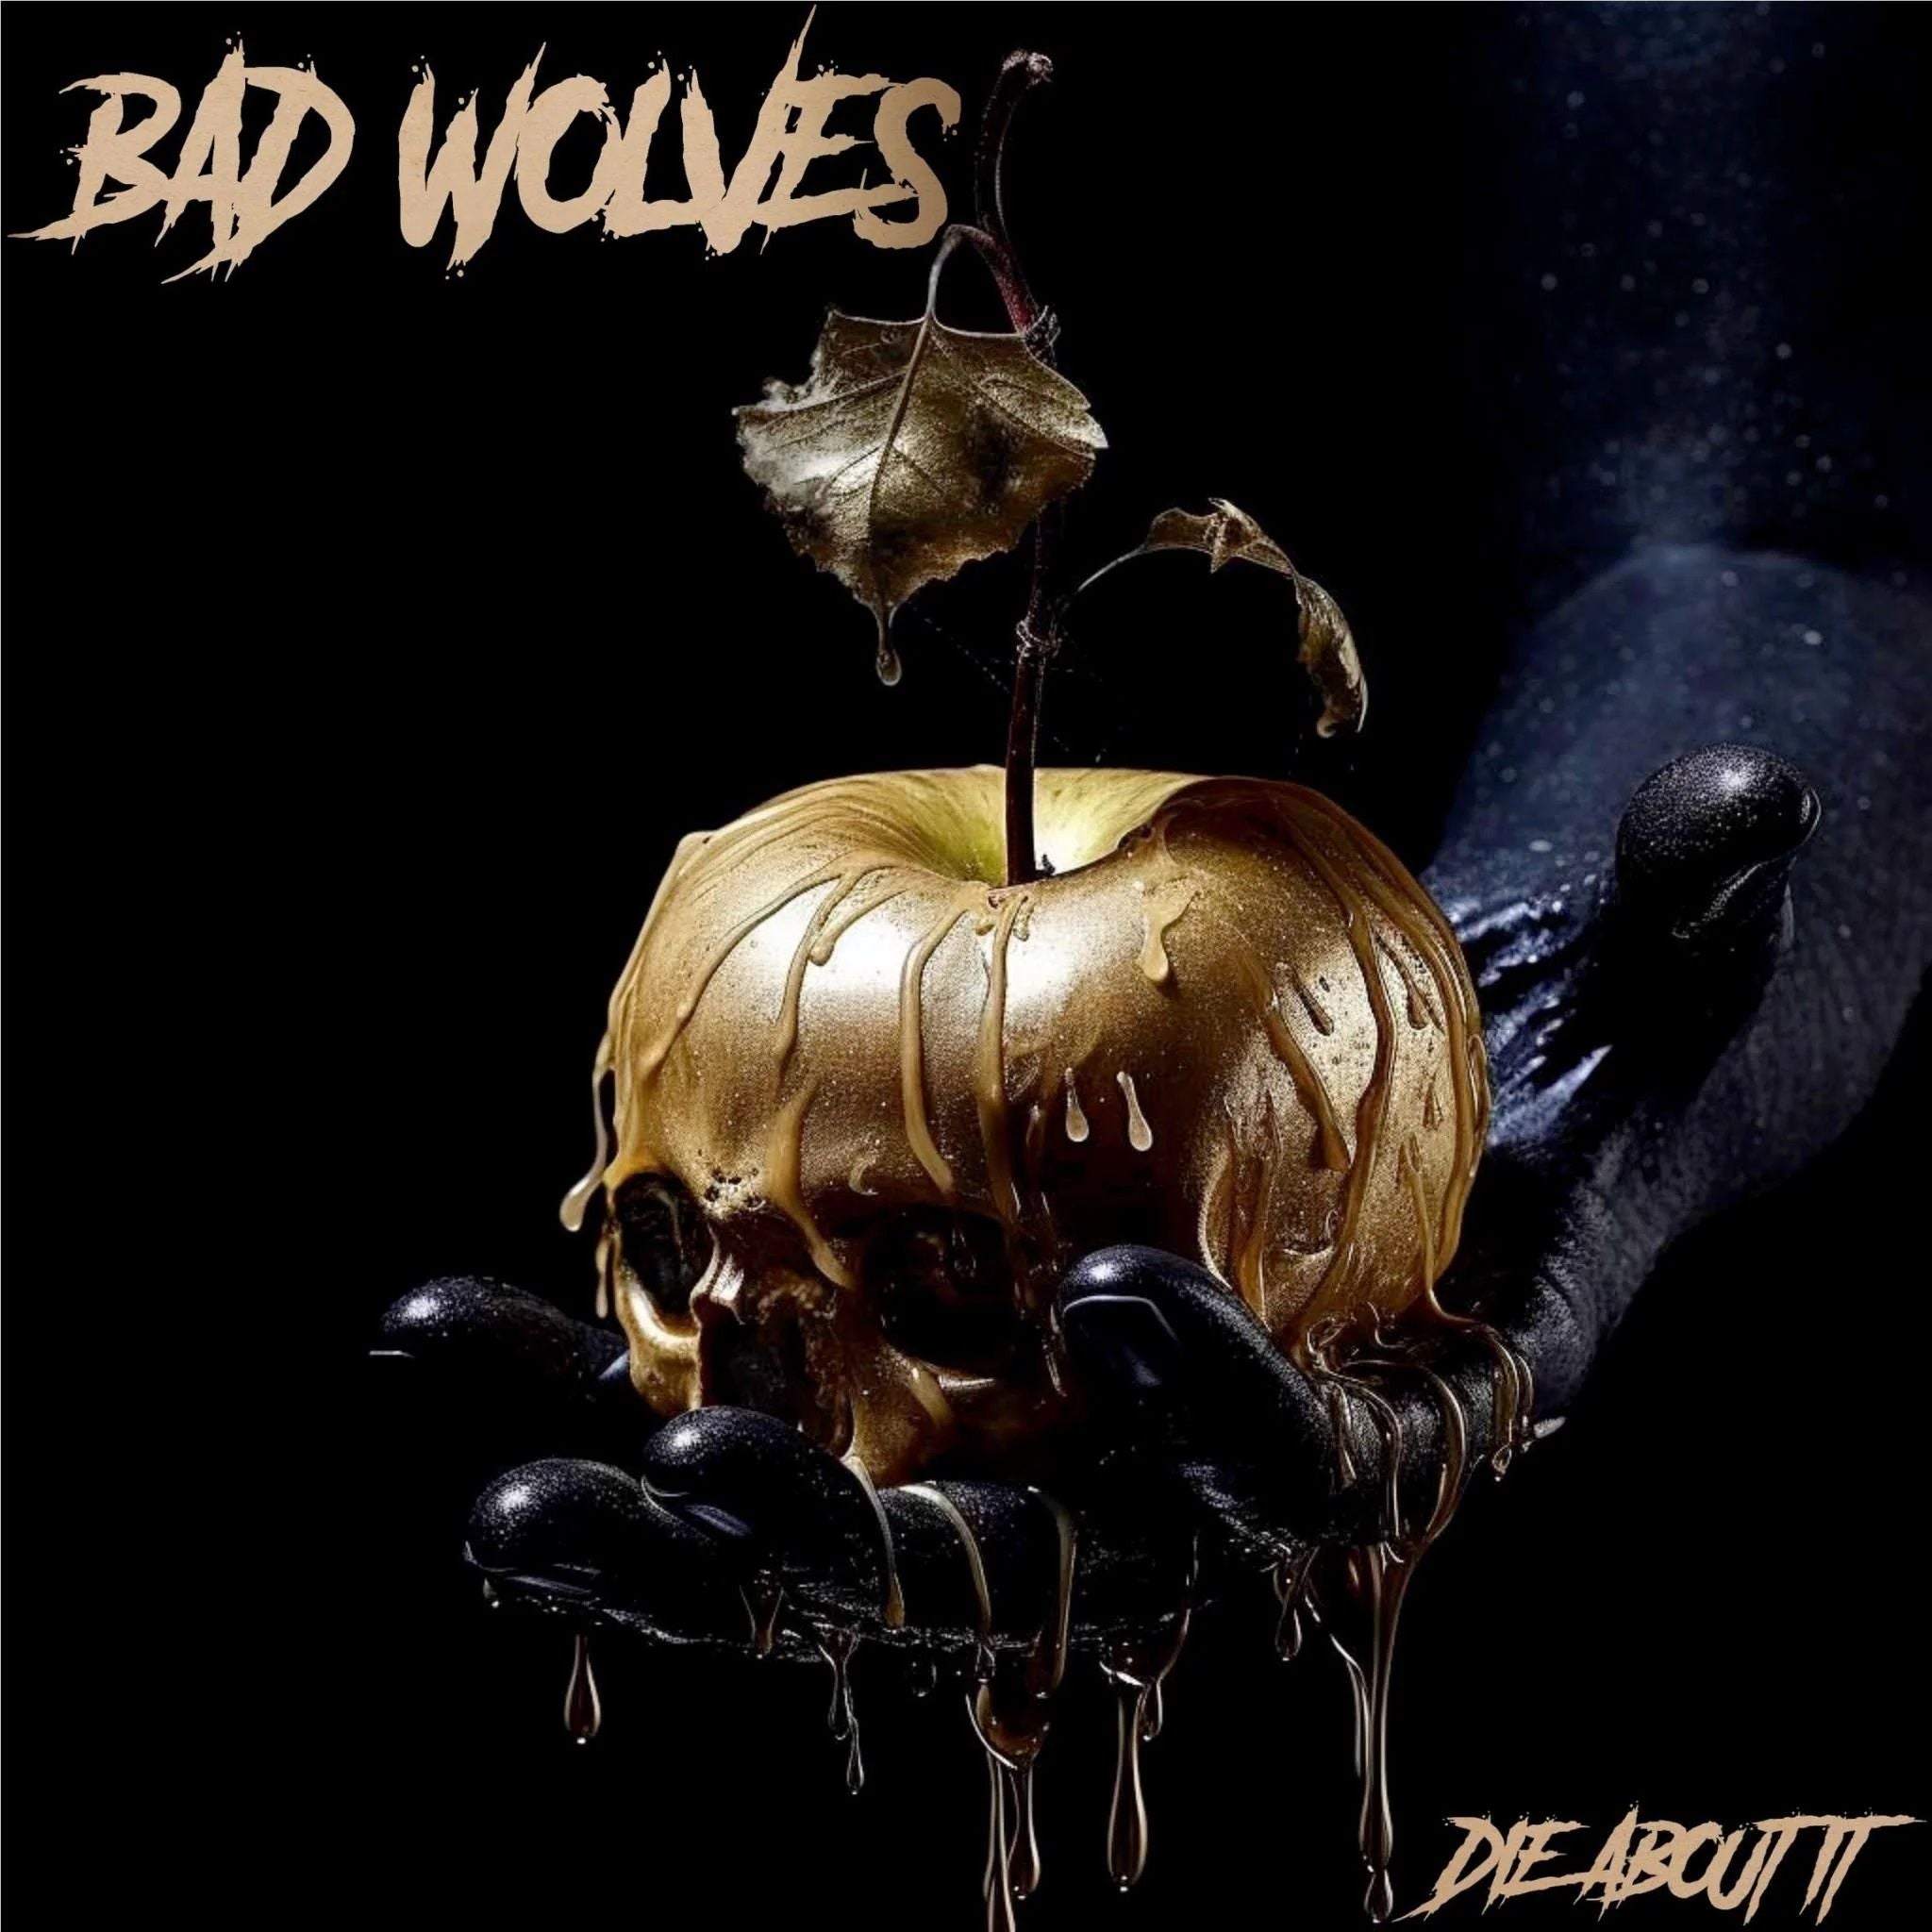 Bad Wolves - Die About It - CD - New